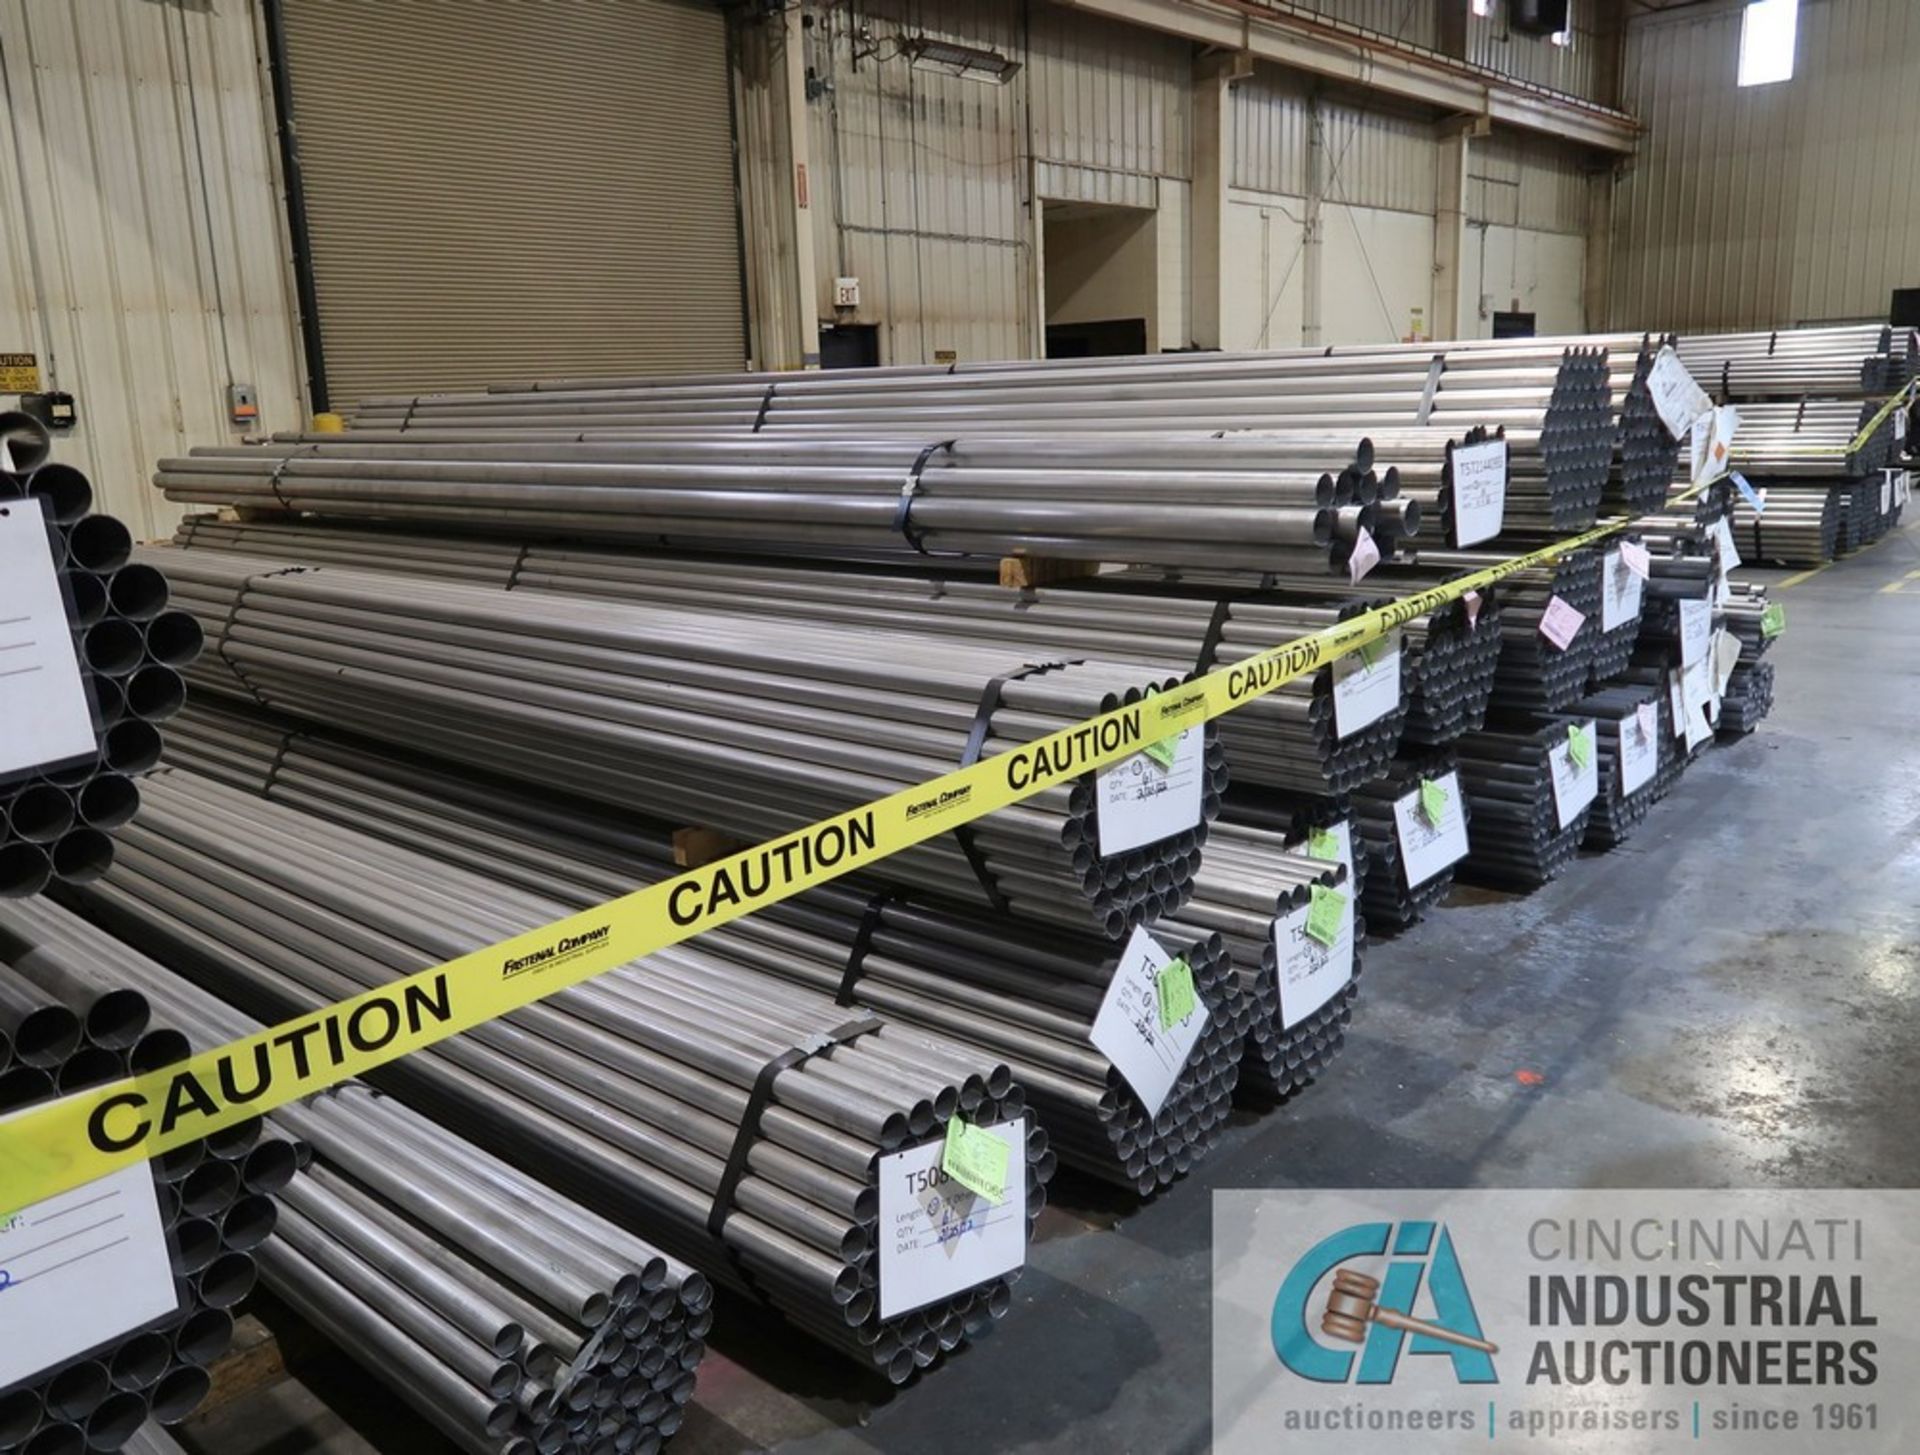 (LOT) (34) BUNDLES OF 20' LONG X .065 ALUMINIZED STEEL TUBING, APPROX. 2,080 TOTAL PIECES, APPROX. - Image 2 of 11